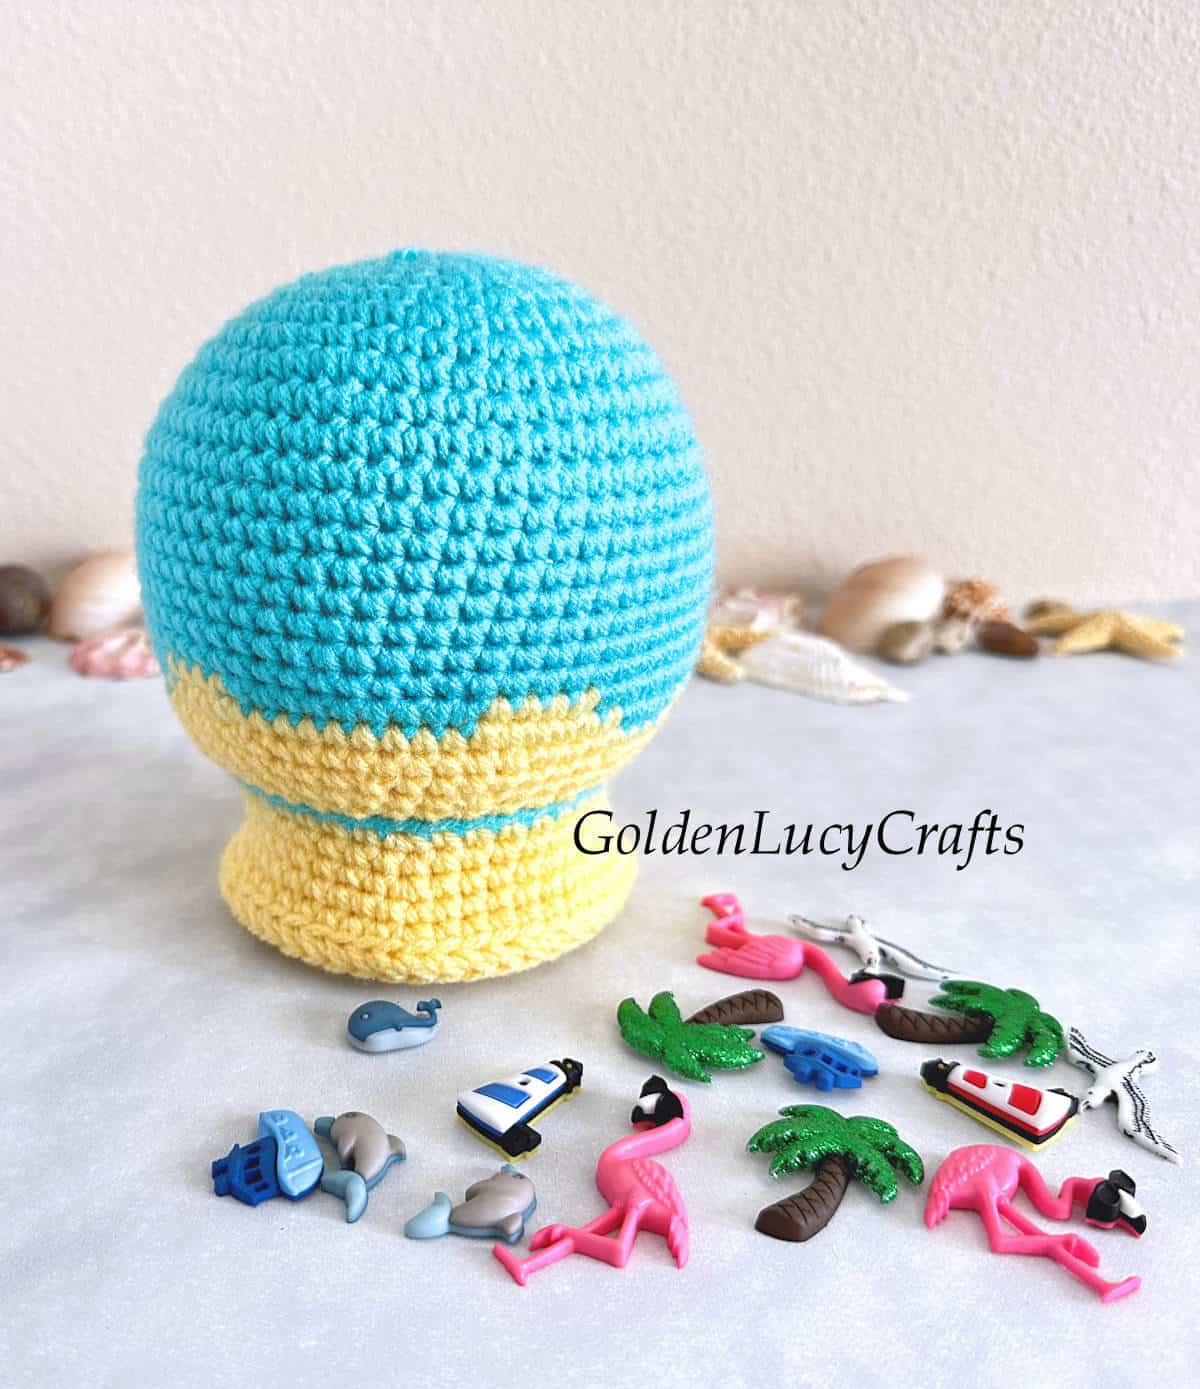 Crocheted snow globe and craft buttons laying next to it.